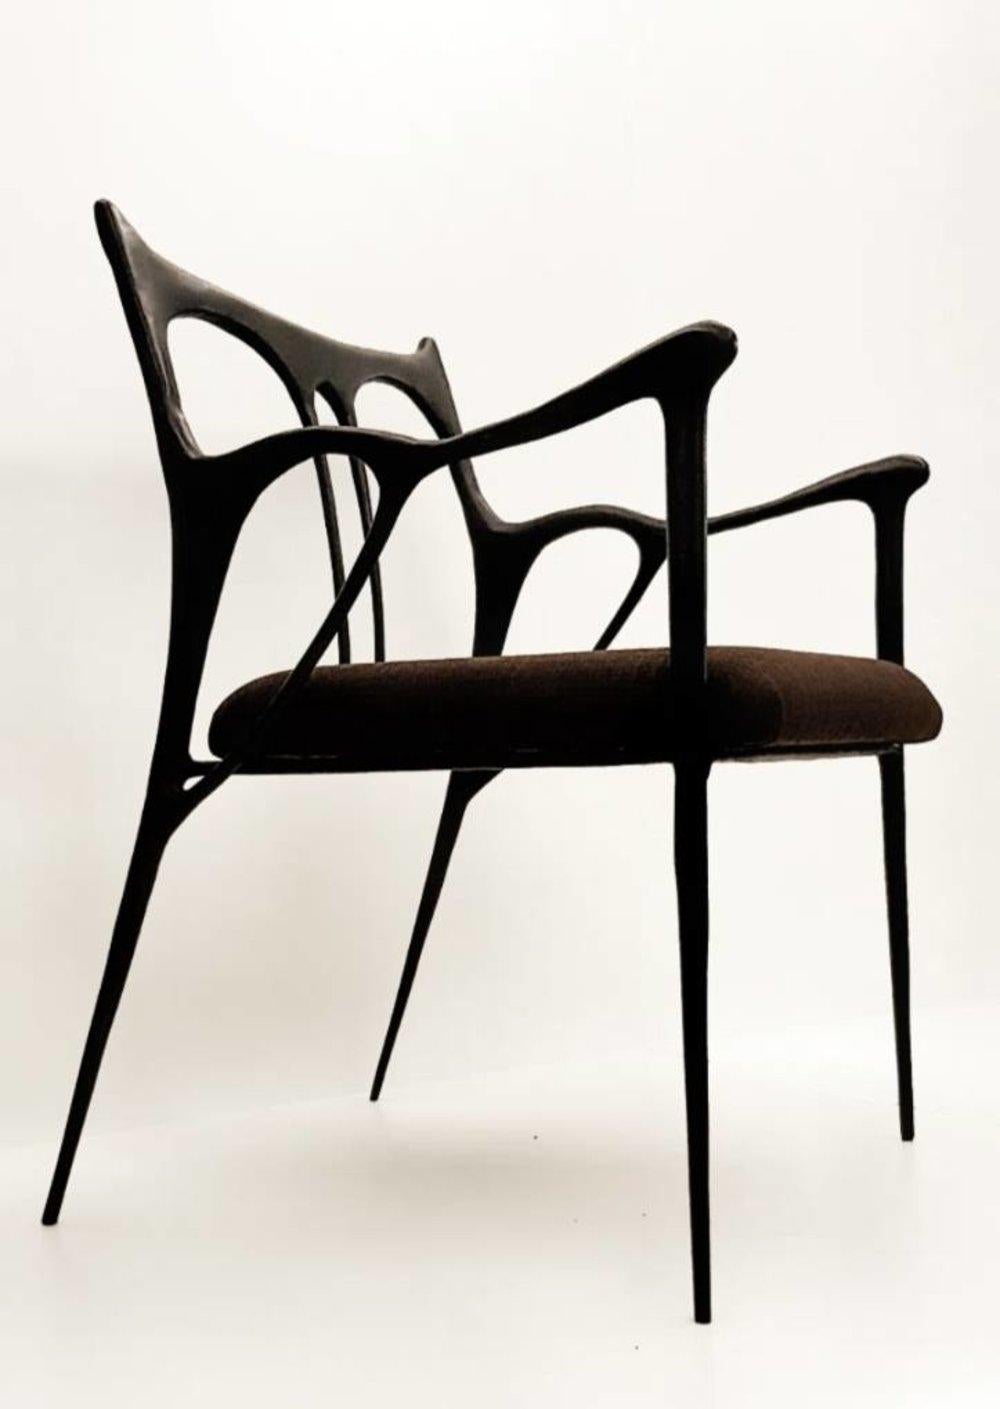 Black brass sculpted brass chair, Misaya.
Dimensions: W 54 x L 58 x H 79 cm (seating: 63)
Hand-sculpted chair in brass.

The translation of Art Nouveau’s whiplash motifs through the subtle expression of an oriental brushstroke. The sculpturally slim